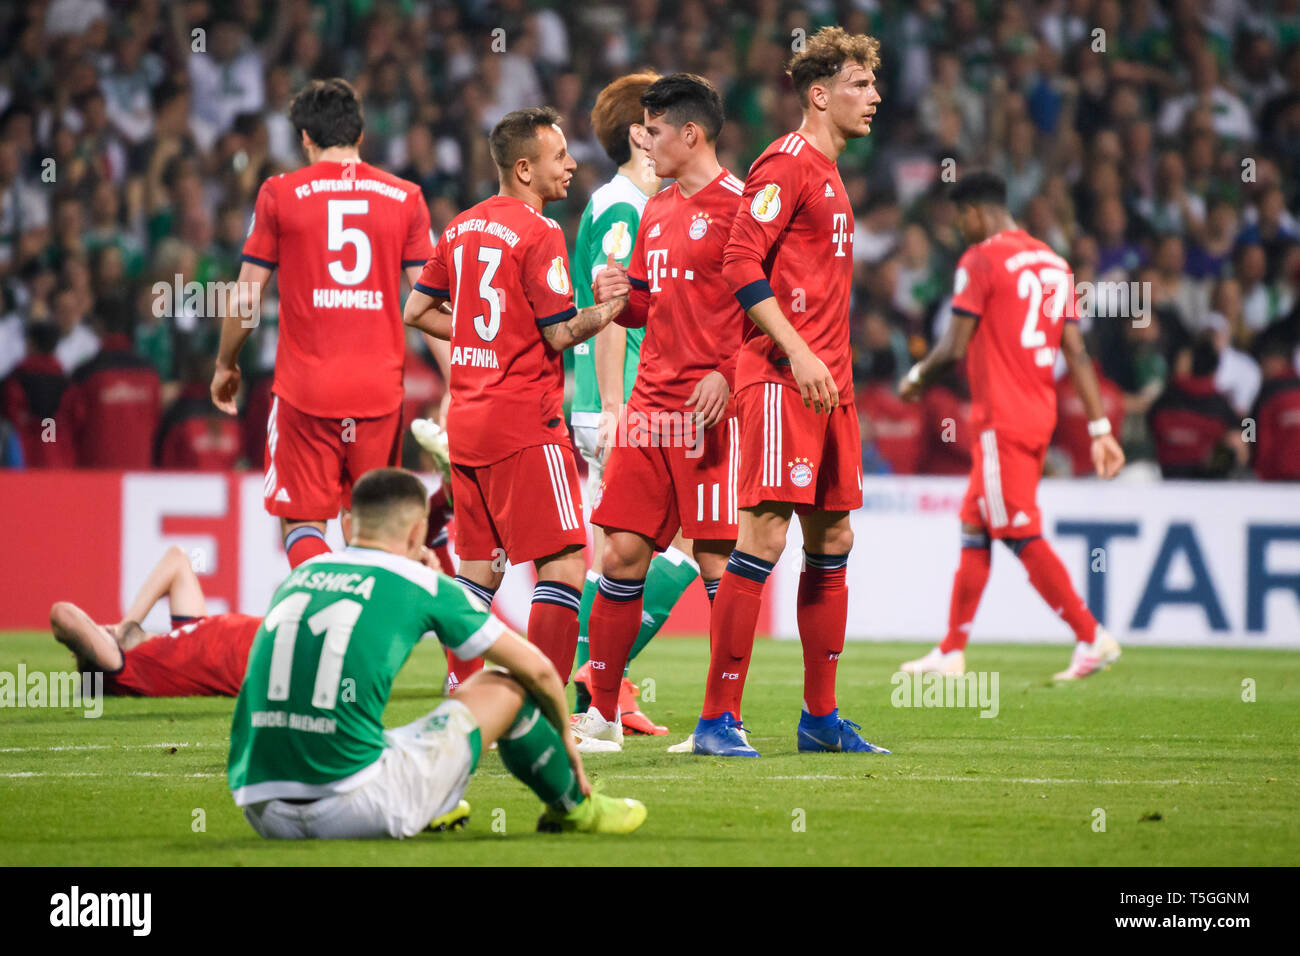 Bremen, Germany. 24th Apr, 2019. Bayern Munich's players celebrate victory  after a semifinal match of German Cup between SV Werder Bremen and FC Bayern  Munich in Bremen, Germany, on April 24, 2019.